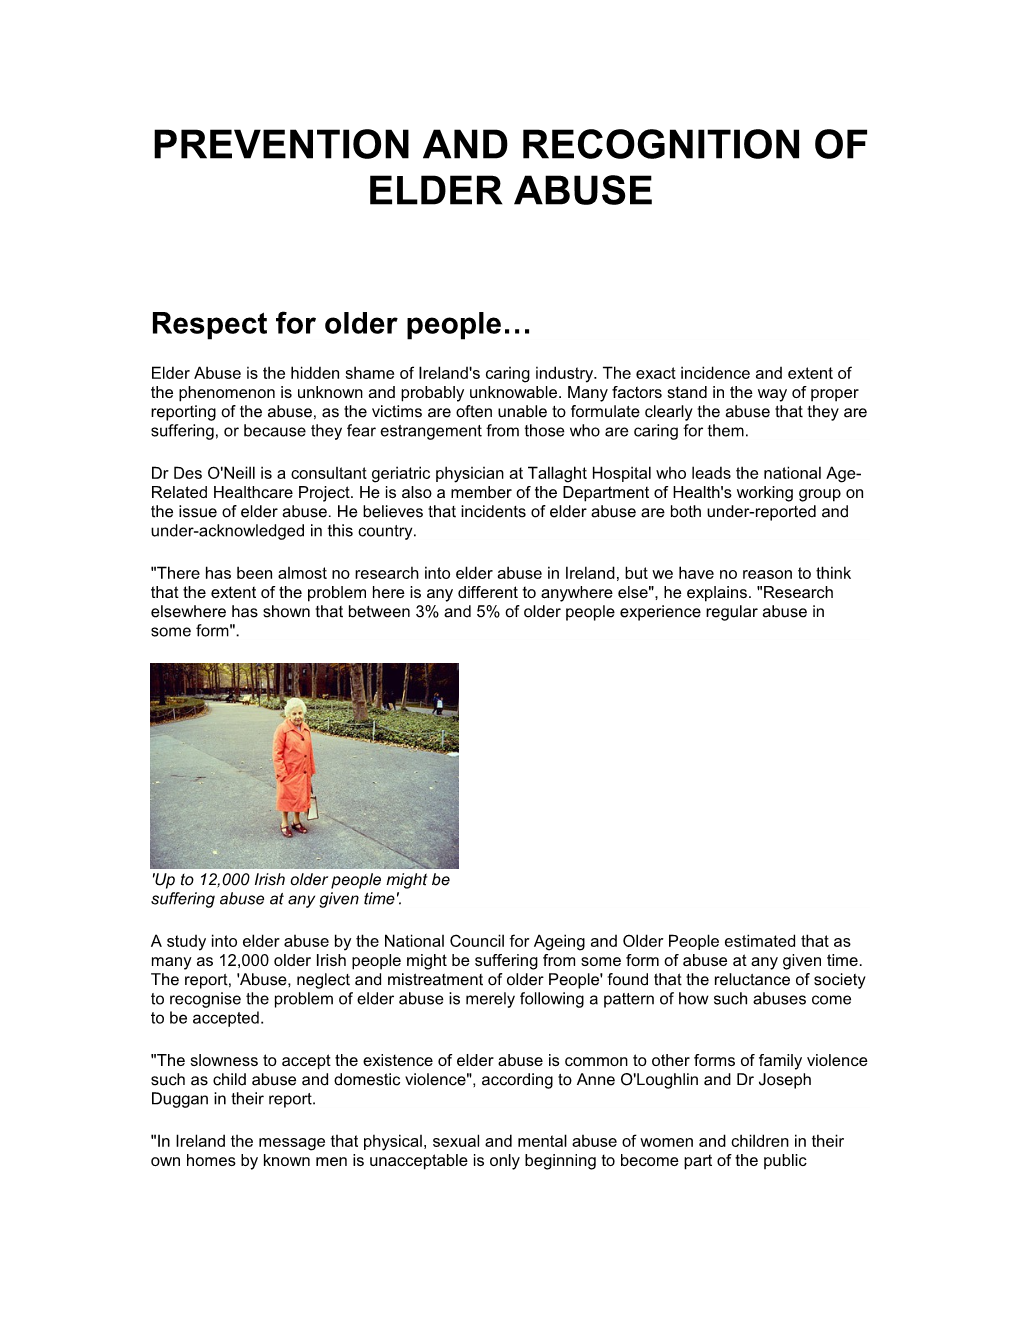 Prevention and Recognition of Elder Abuse